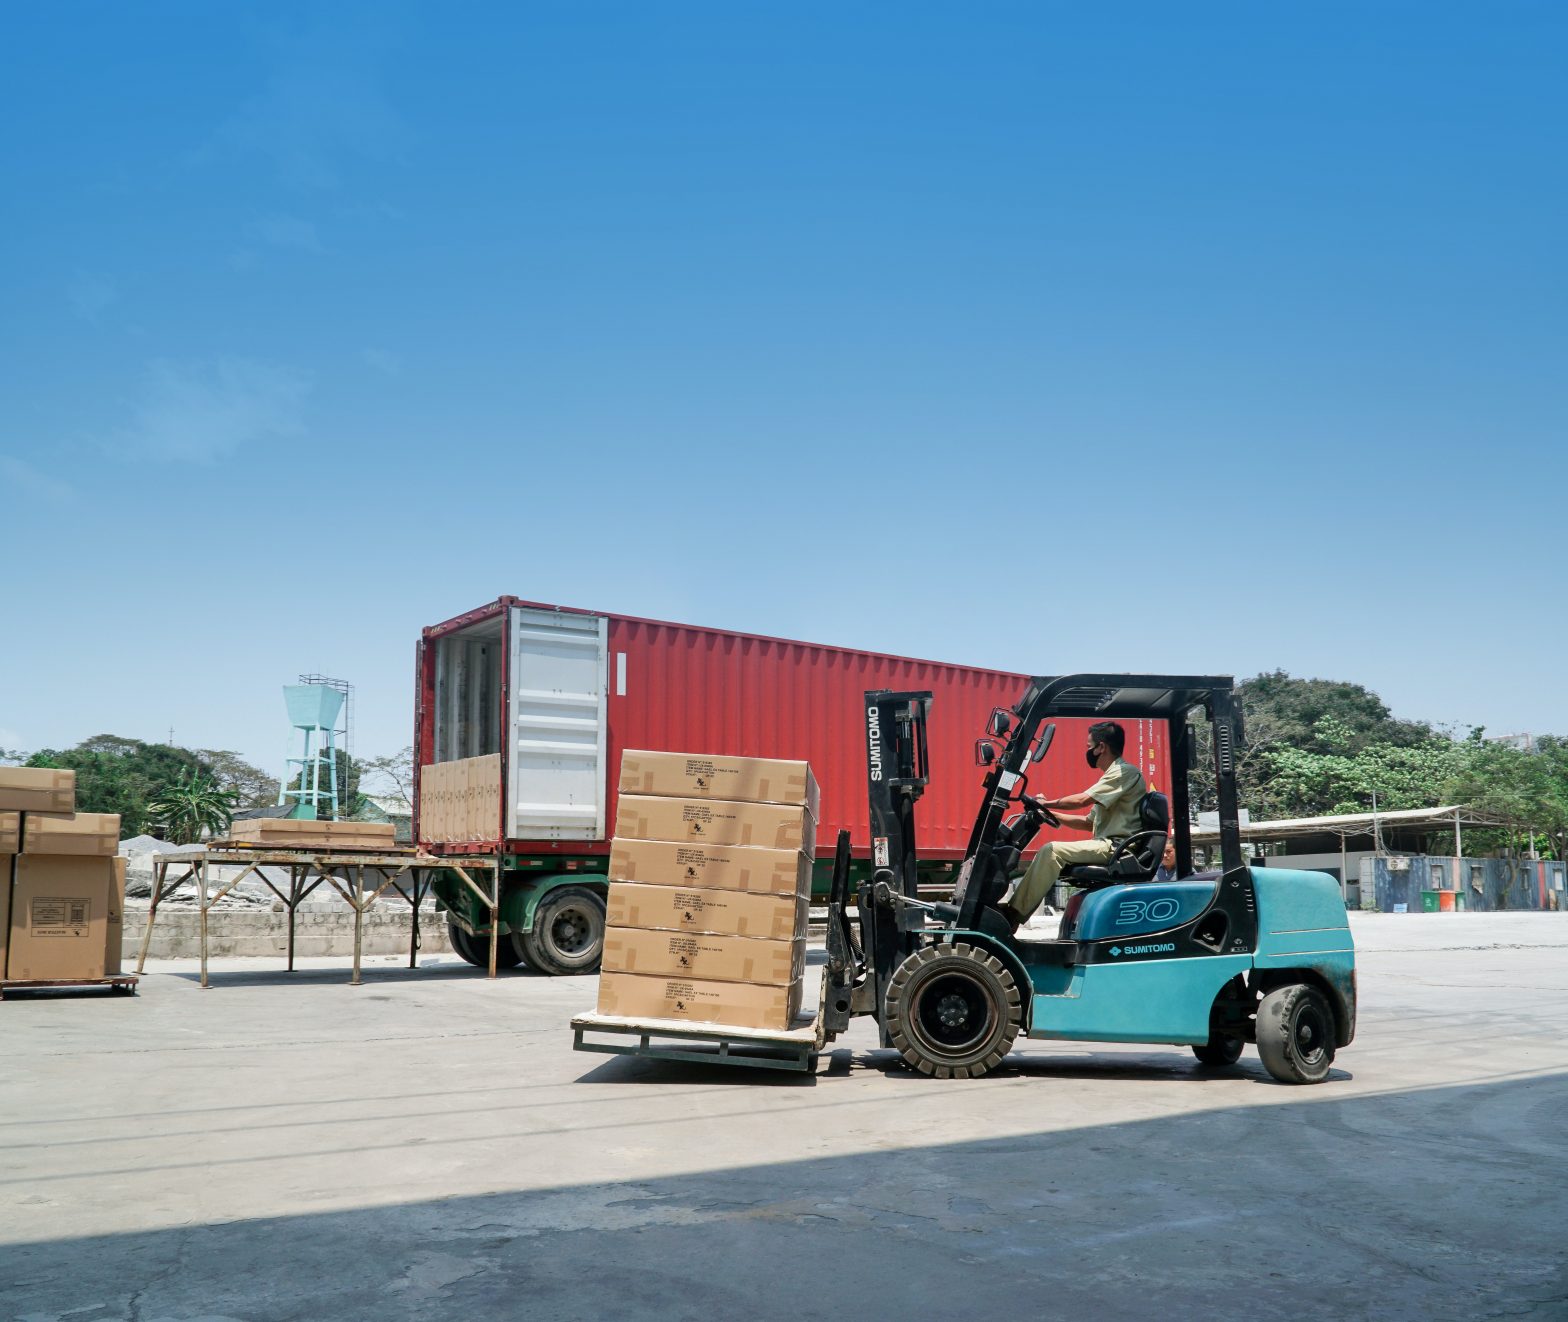 A truck is being loaded up with pallets by a forklift operator